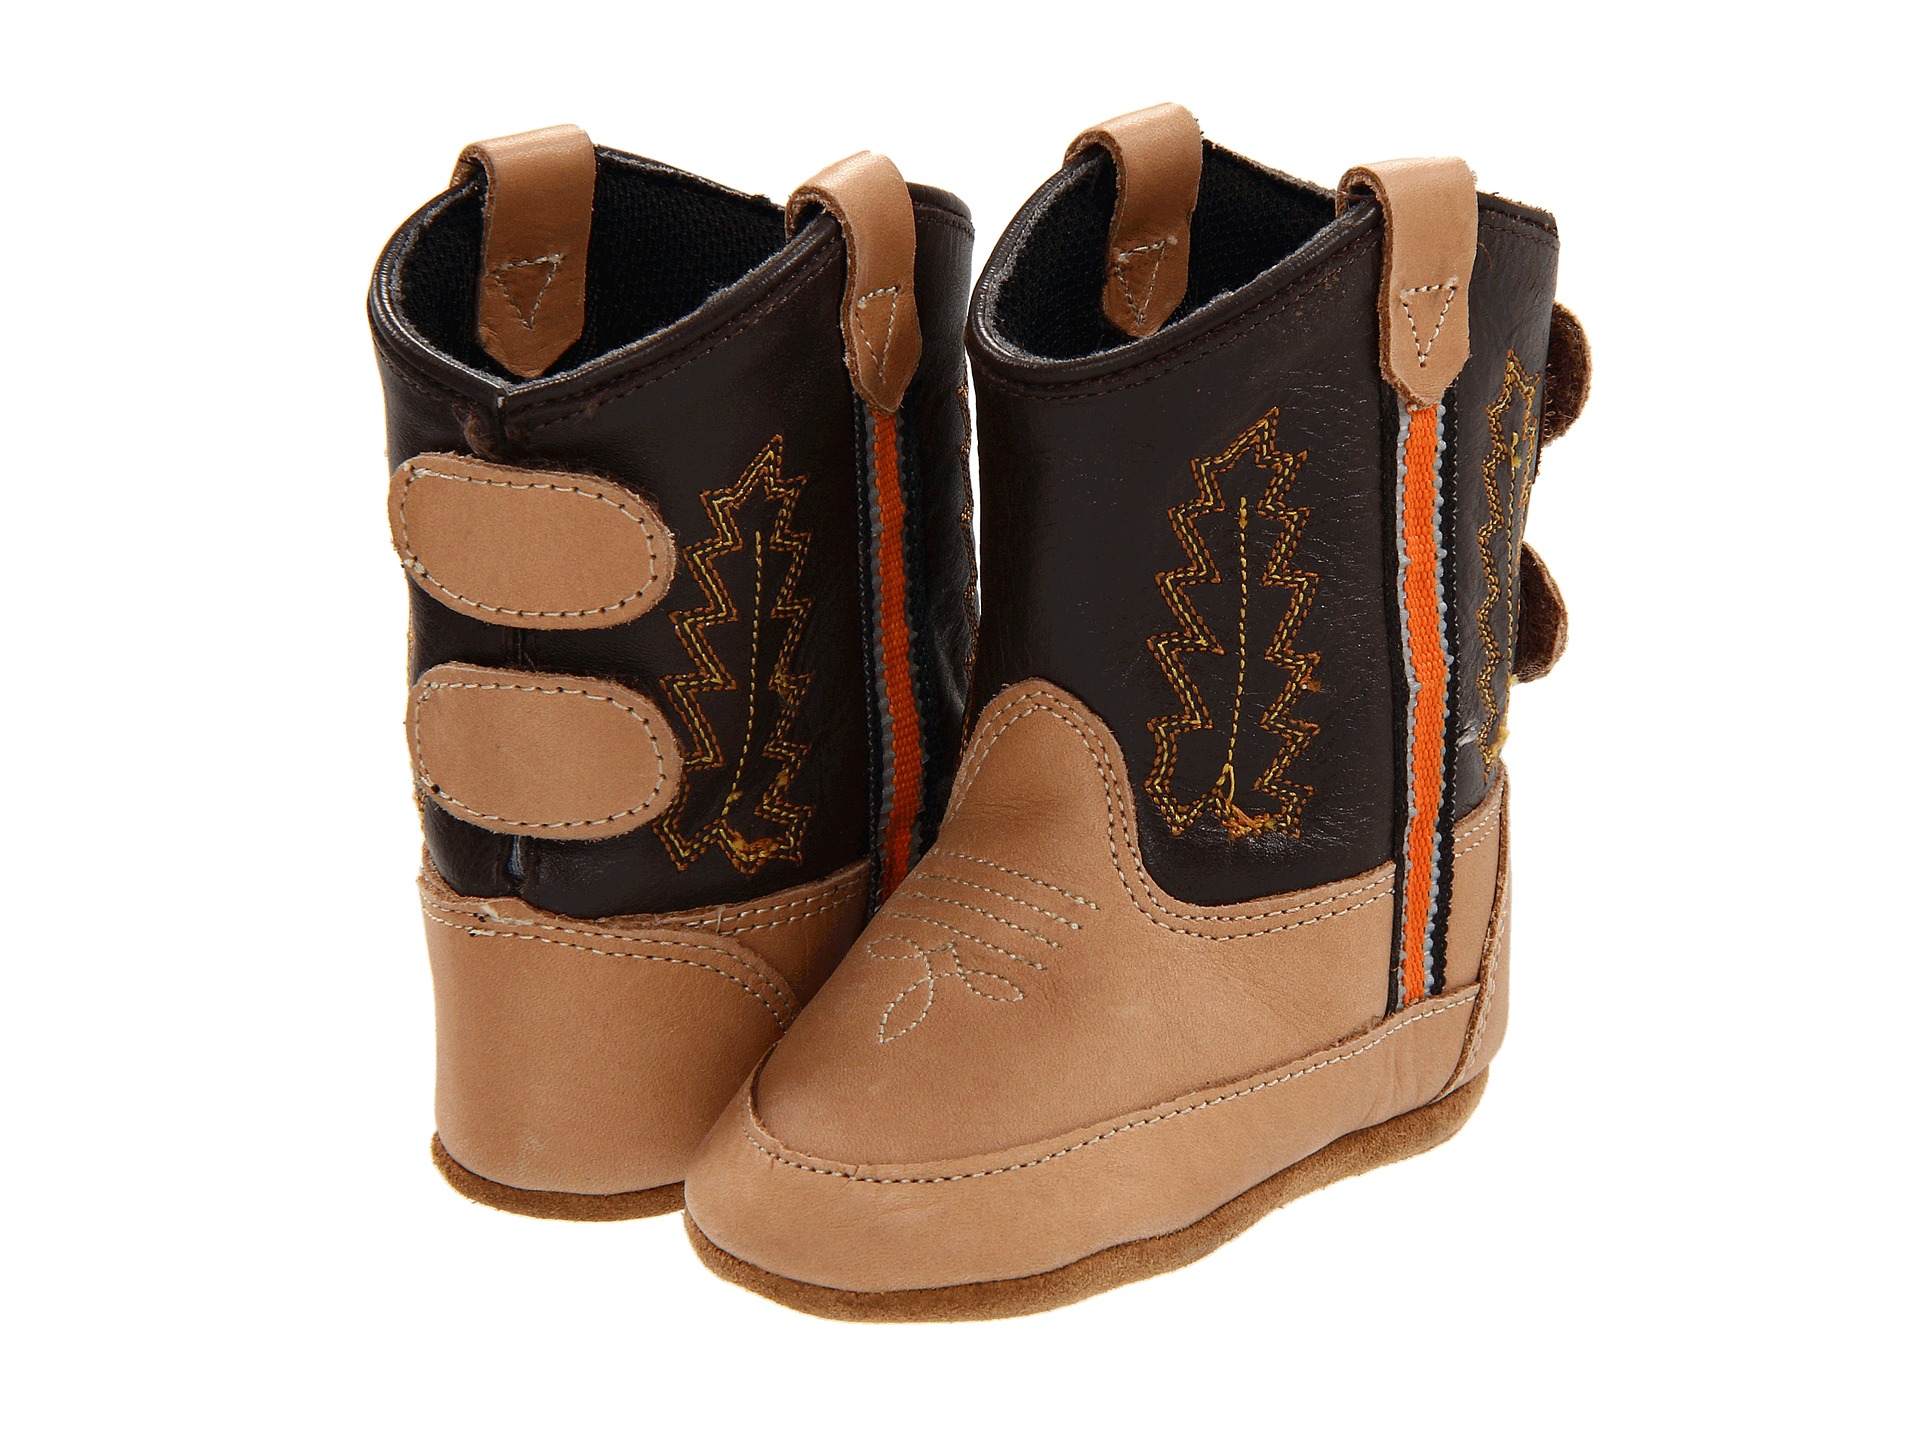 Old West Kids Boots Poppets (InfantToddler) - Zappos Free ...